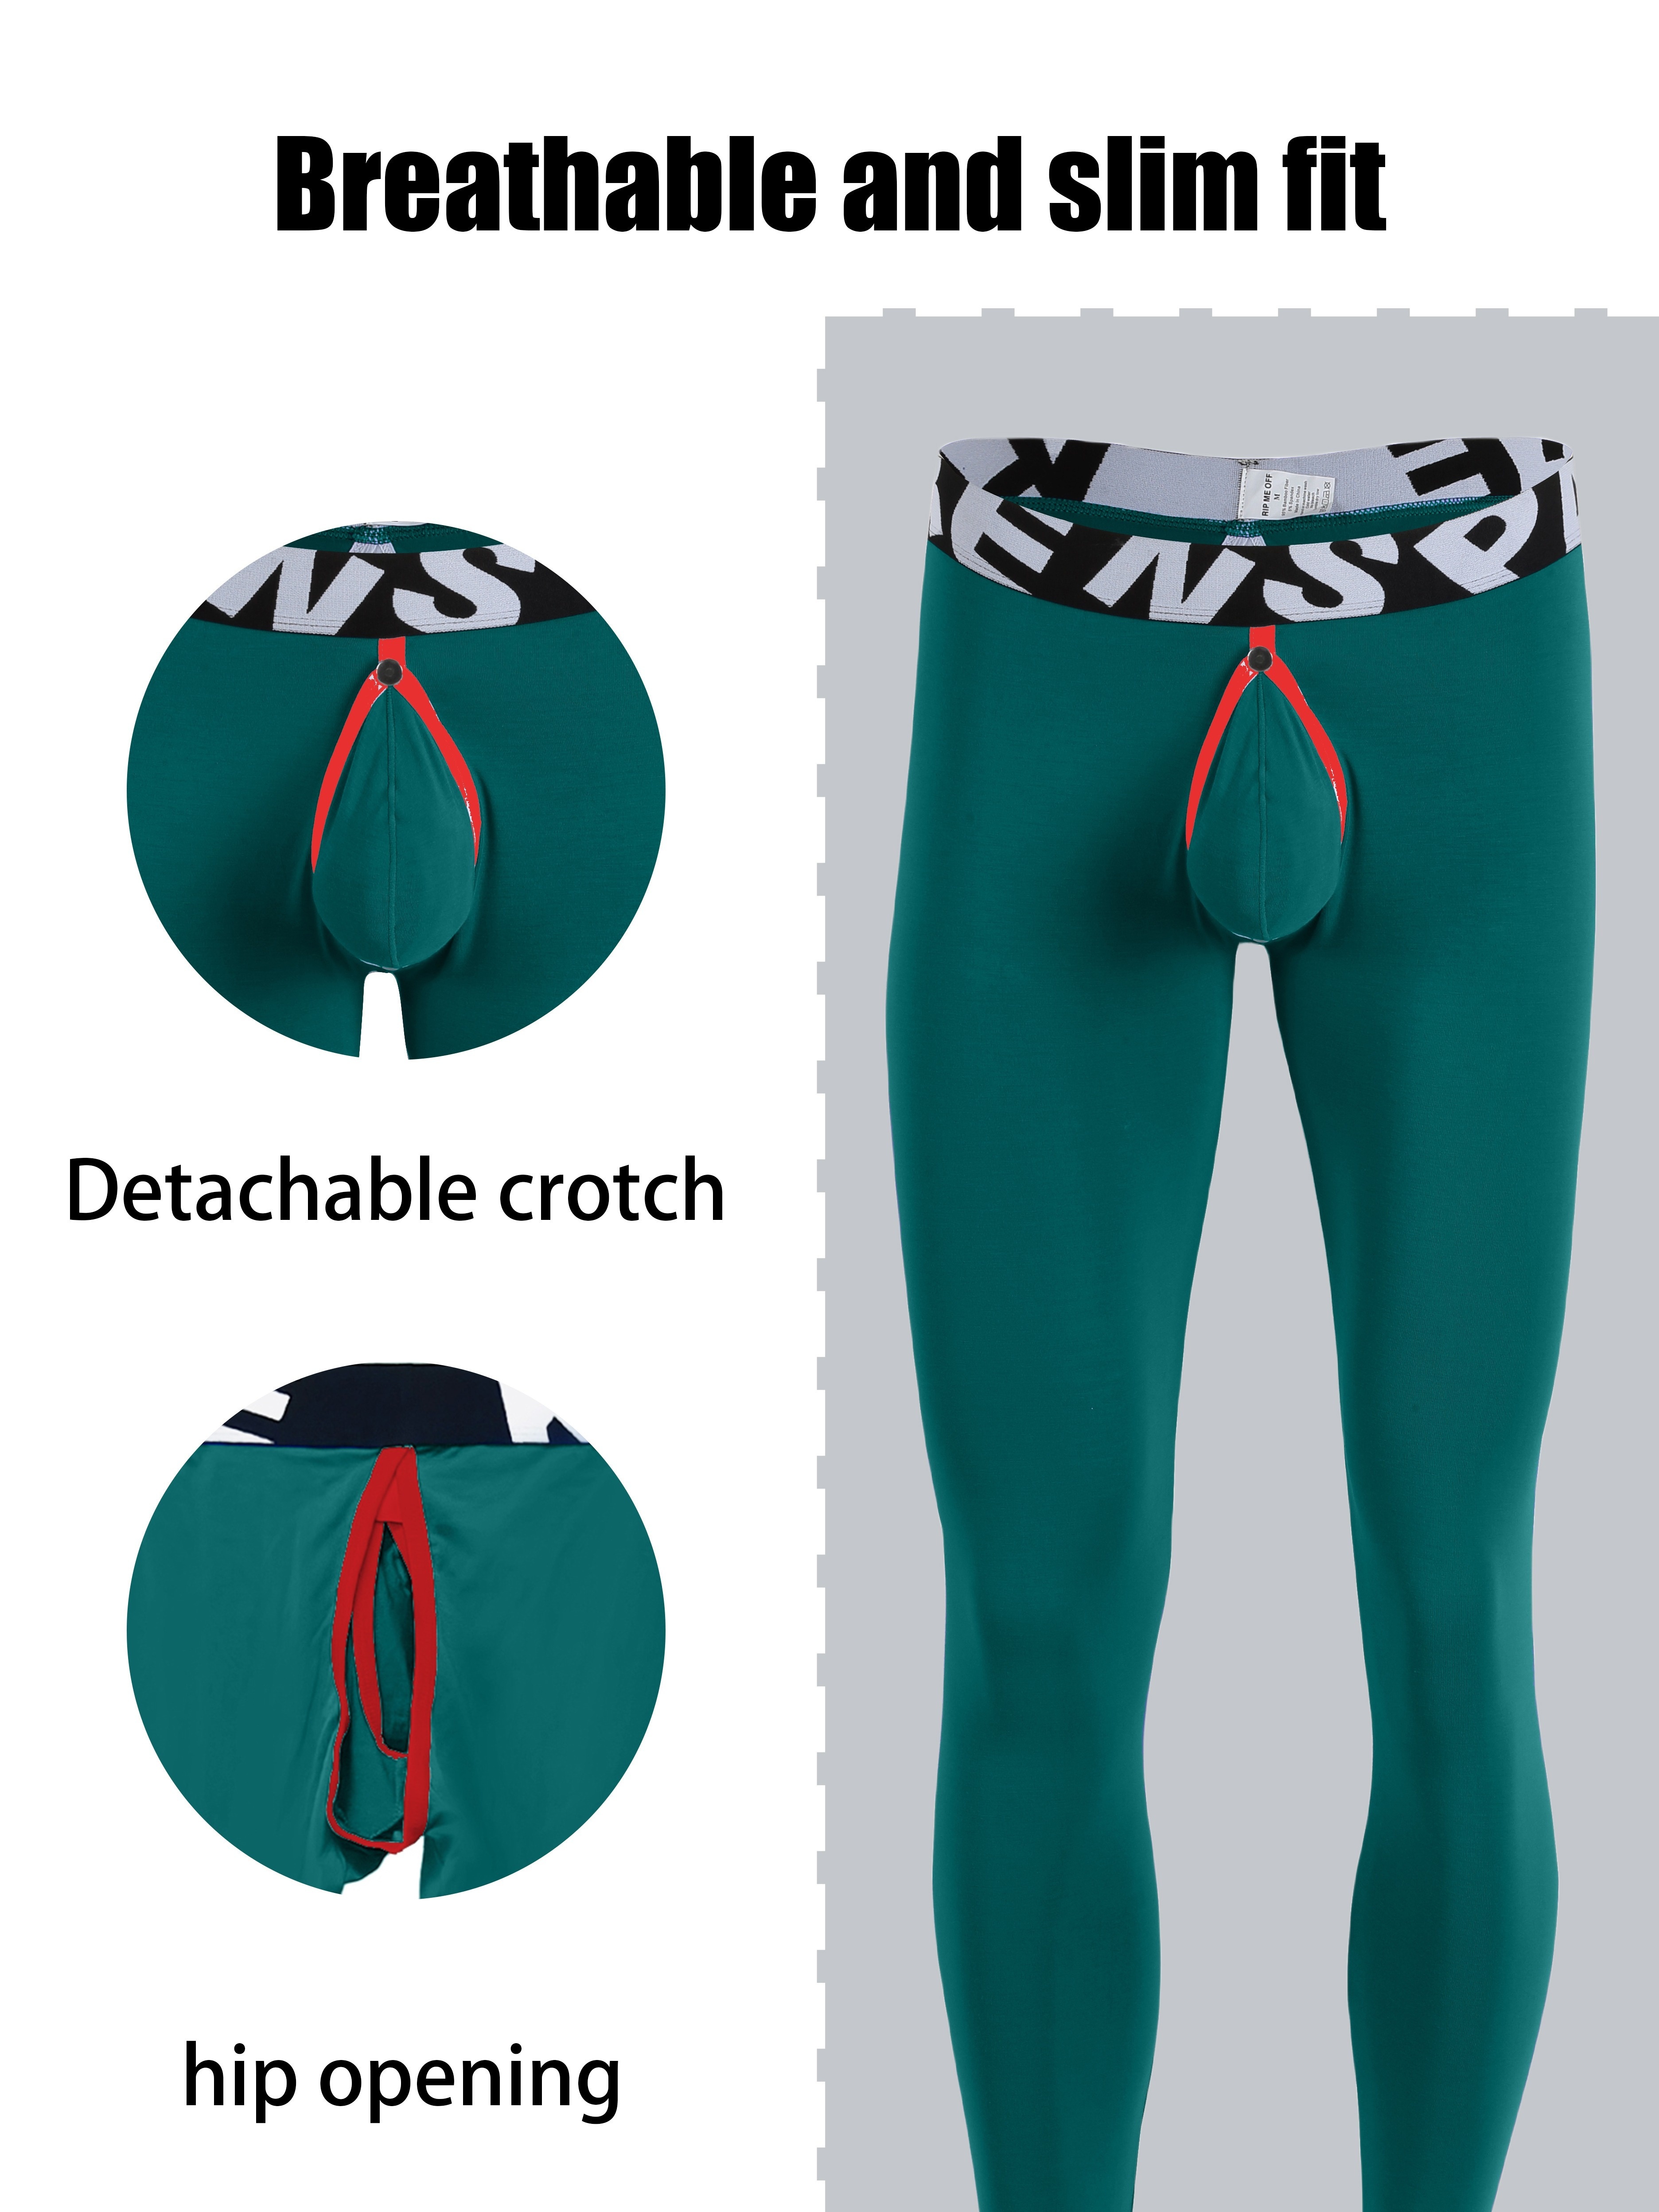 Breathable Thermal Underwear Pants Mens With Open Crotch